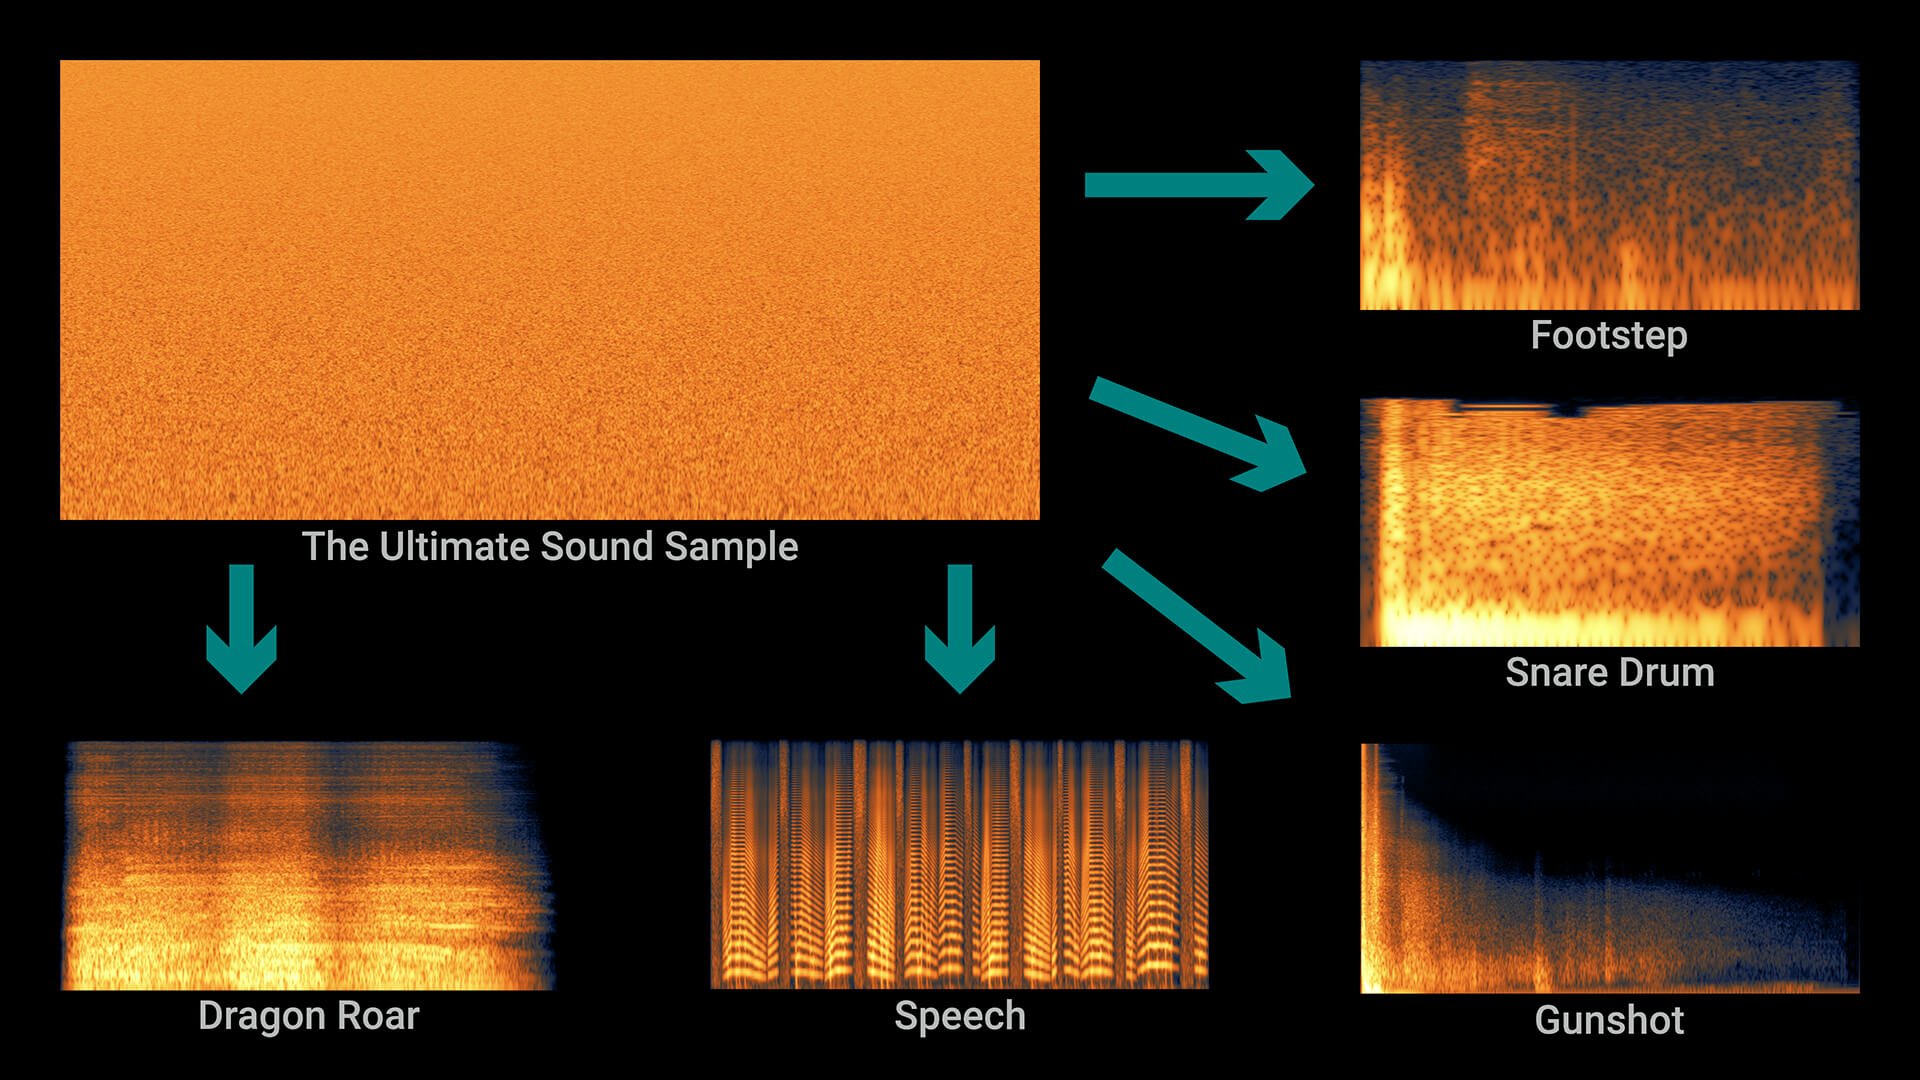 A diagram showing spectrograms of various sound recordings used in games, film, and music production in comparison with a spectrogram showing all frequencies having the same energy over time.